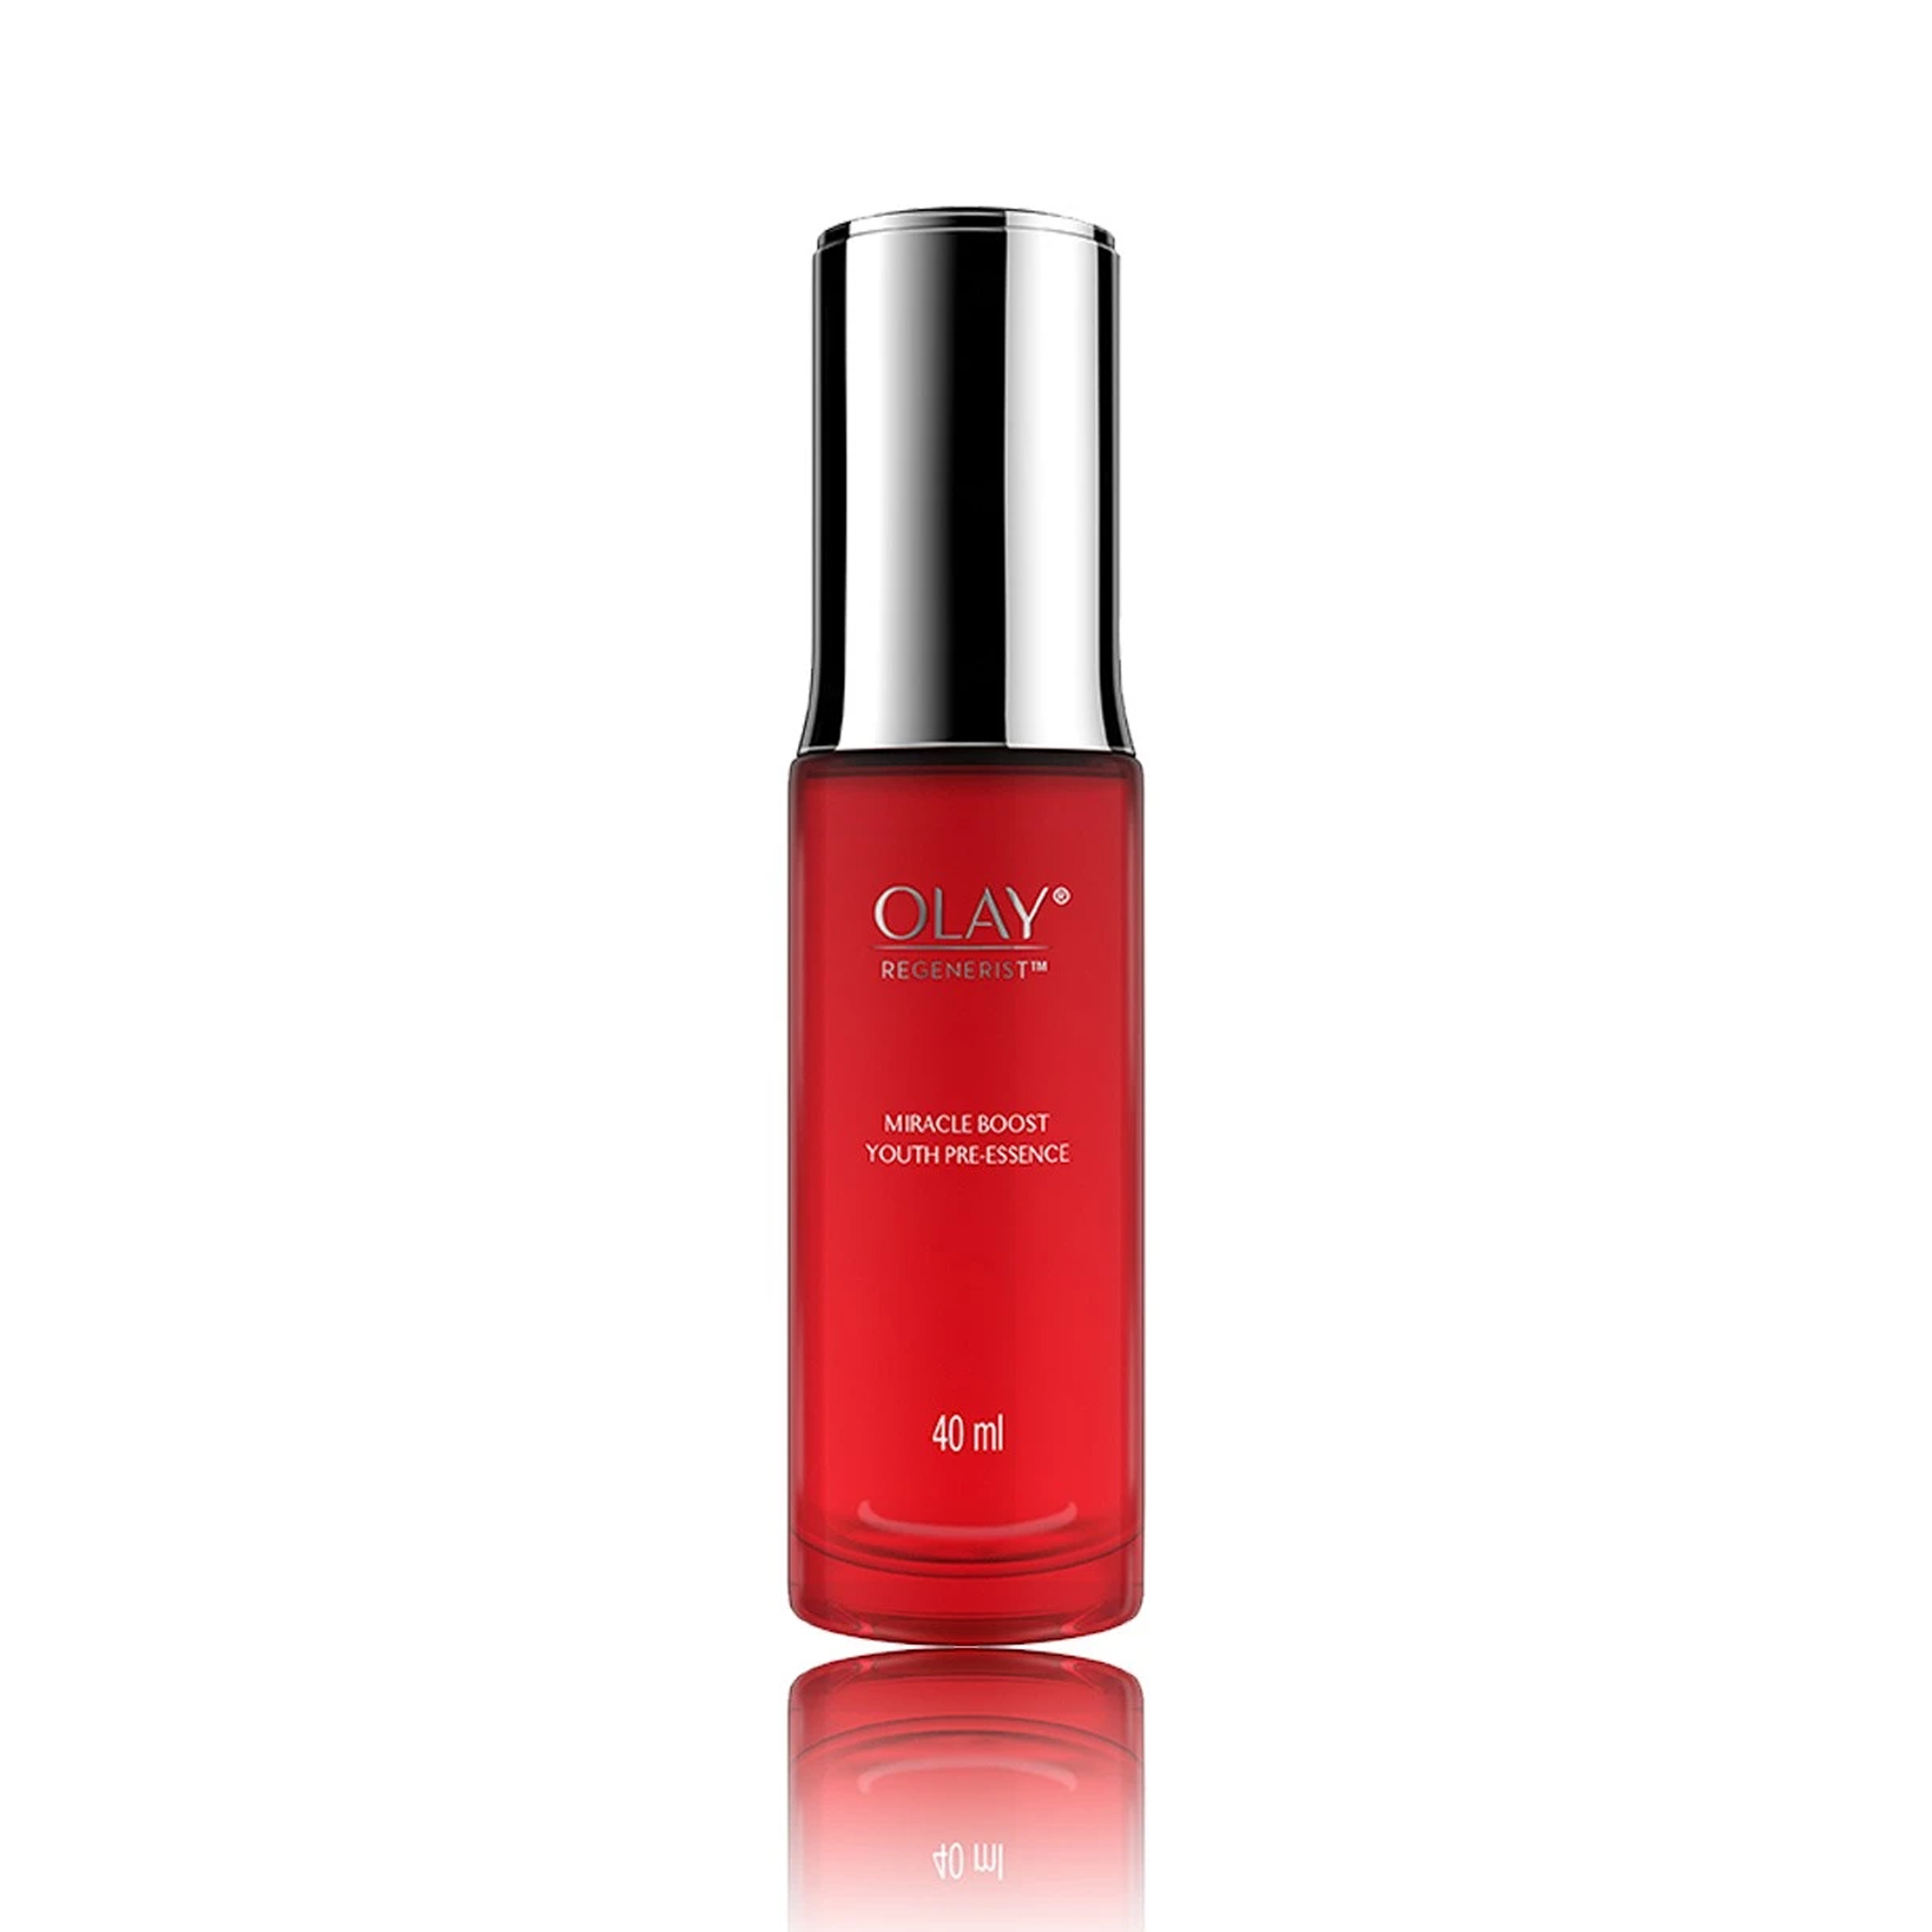 Olay Regenerist Miracle Boost Youth Treatment Essence